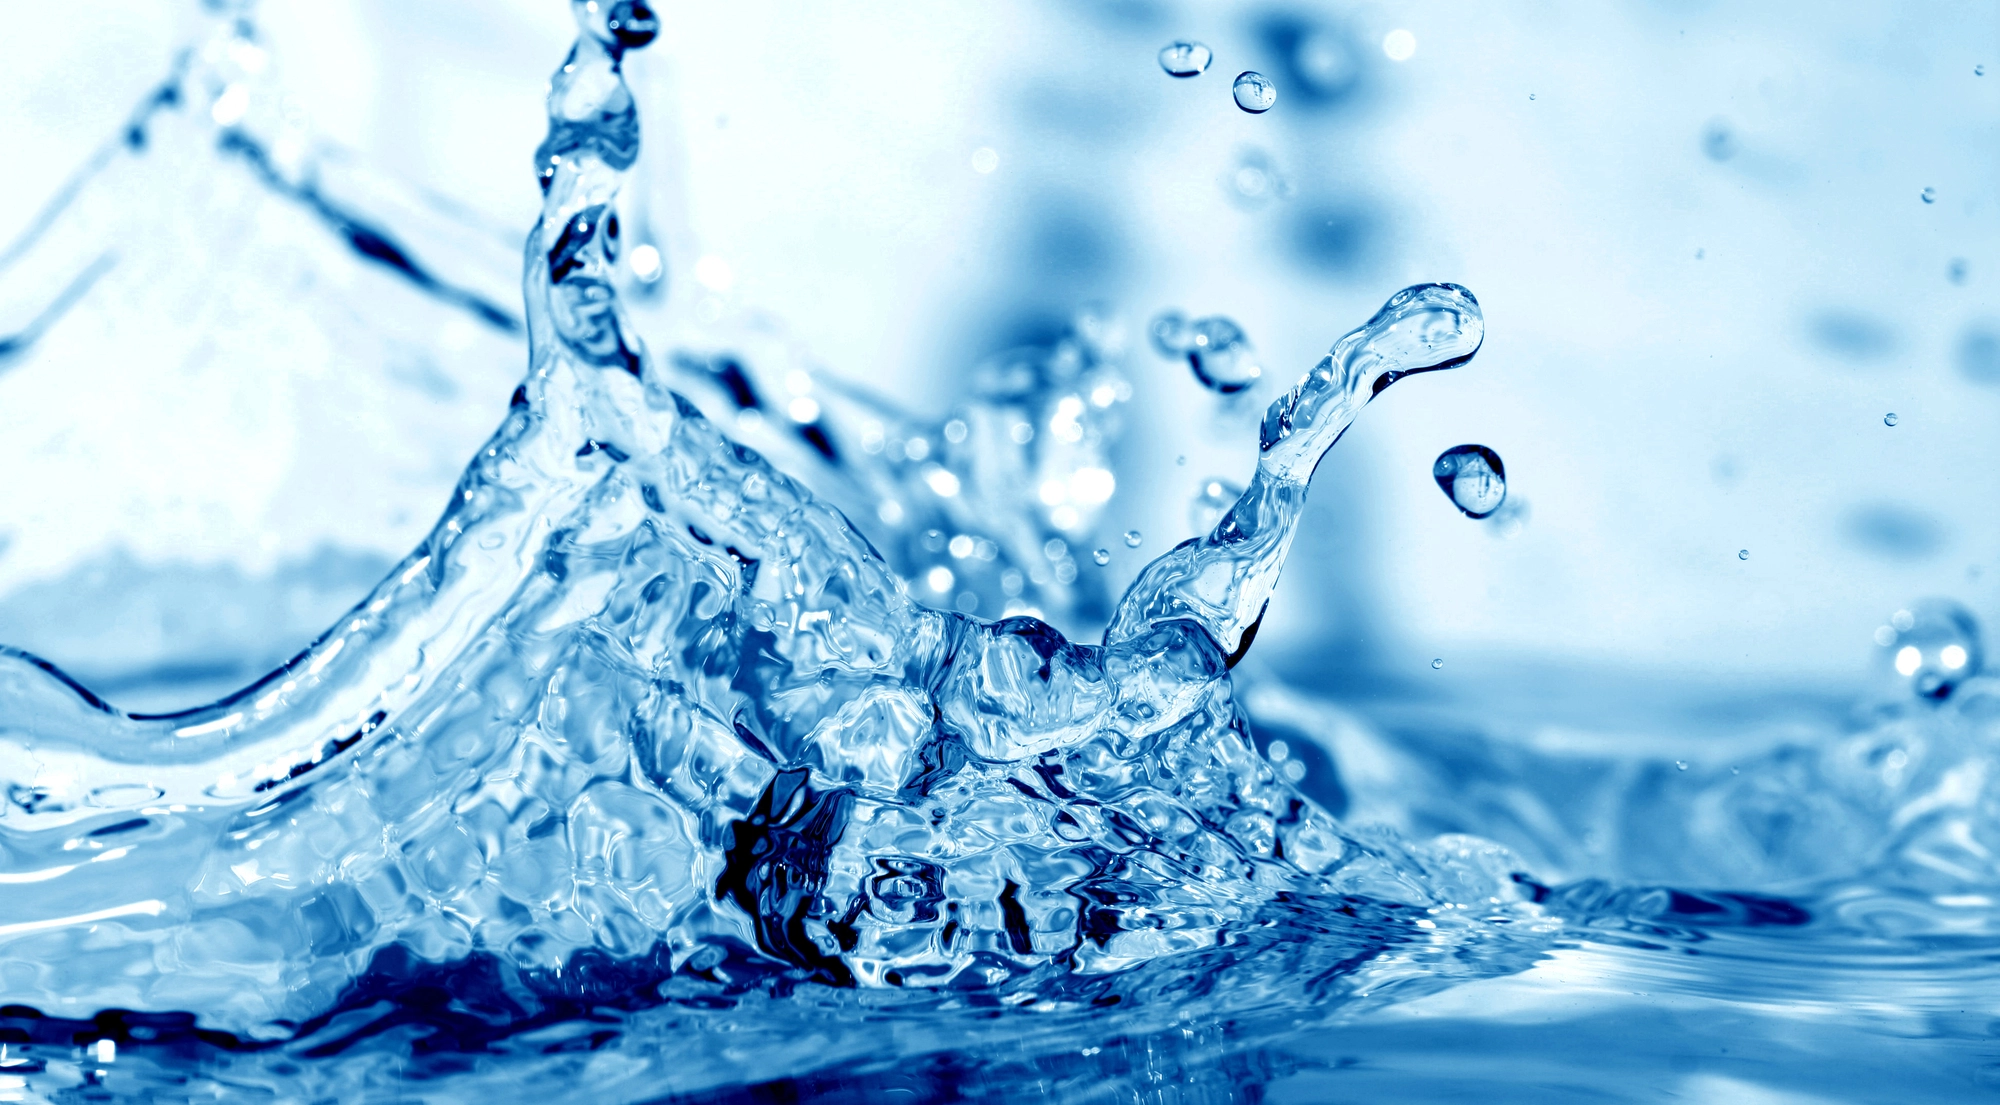 Reverse Osmosis explained and usage » Ecologix Systems